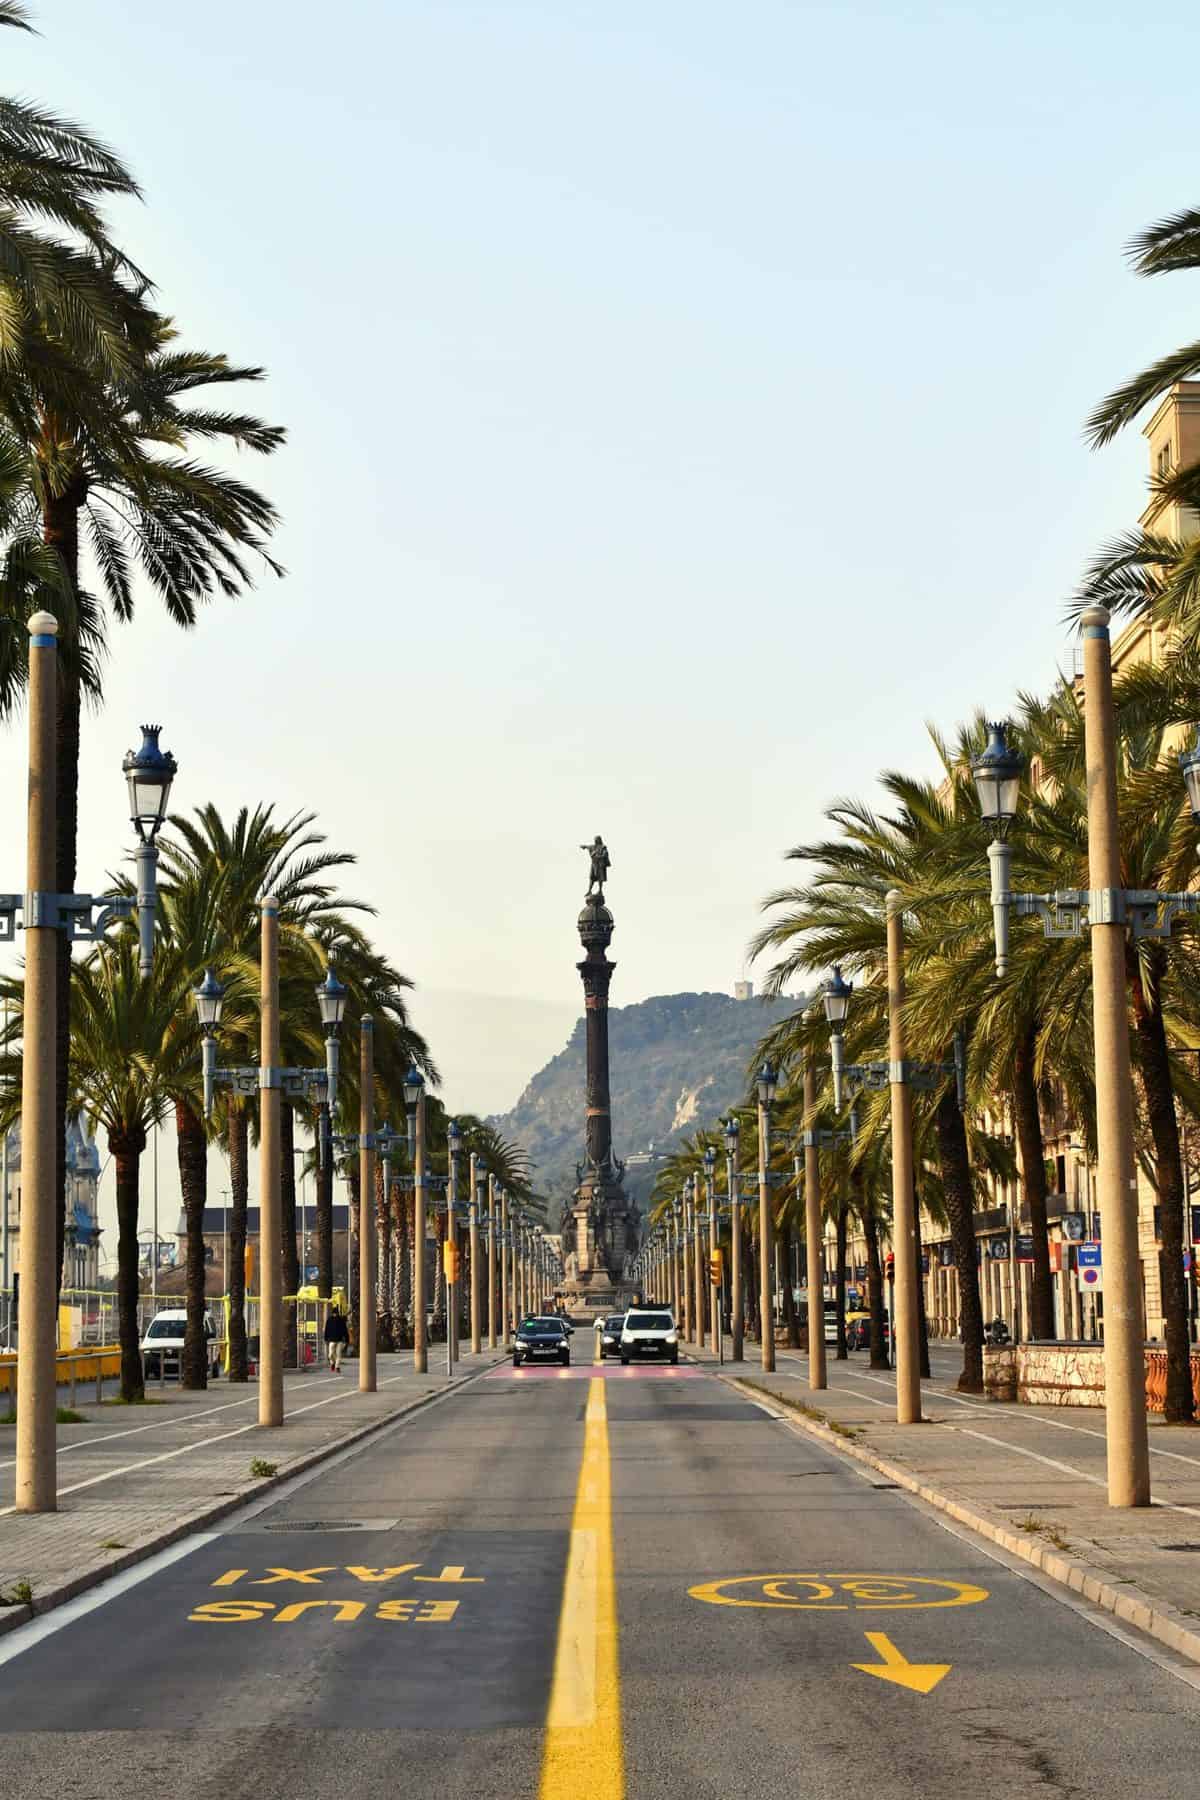 View down a two-lane street lined by palm trees to a decorative column